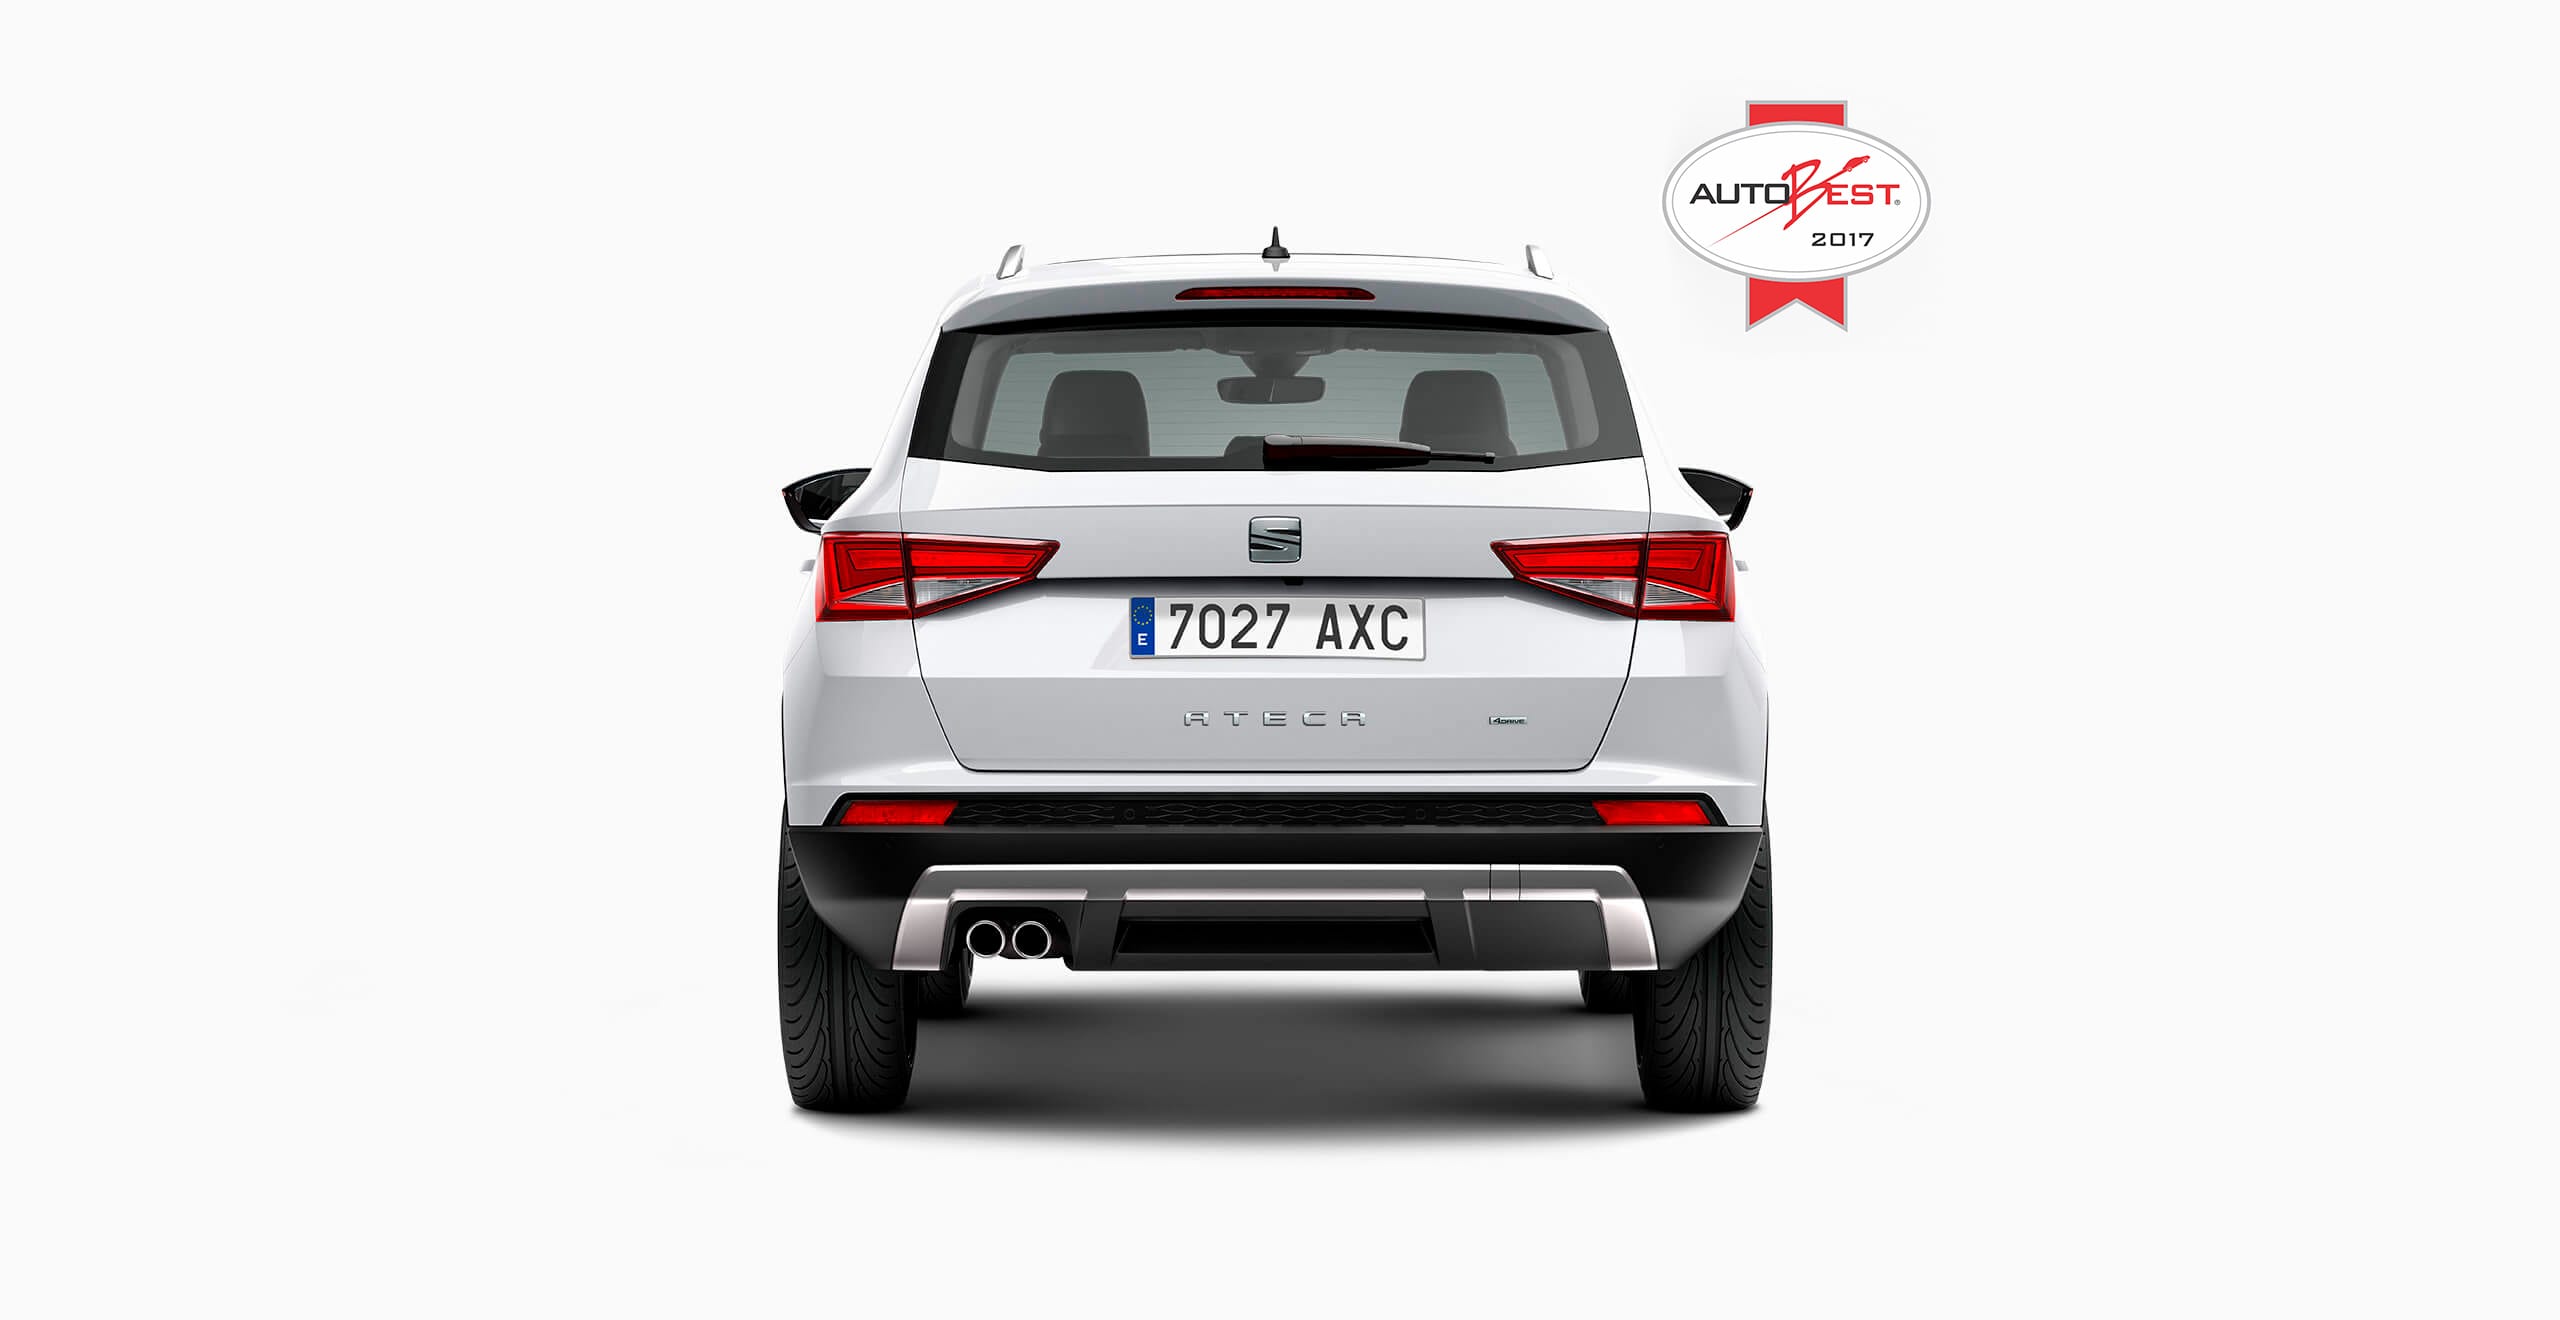 back side of the White SEAT Ateca awards Best Buy Car of Europe 2017 image